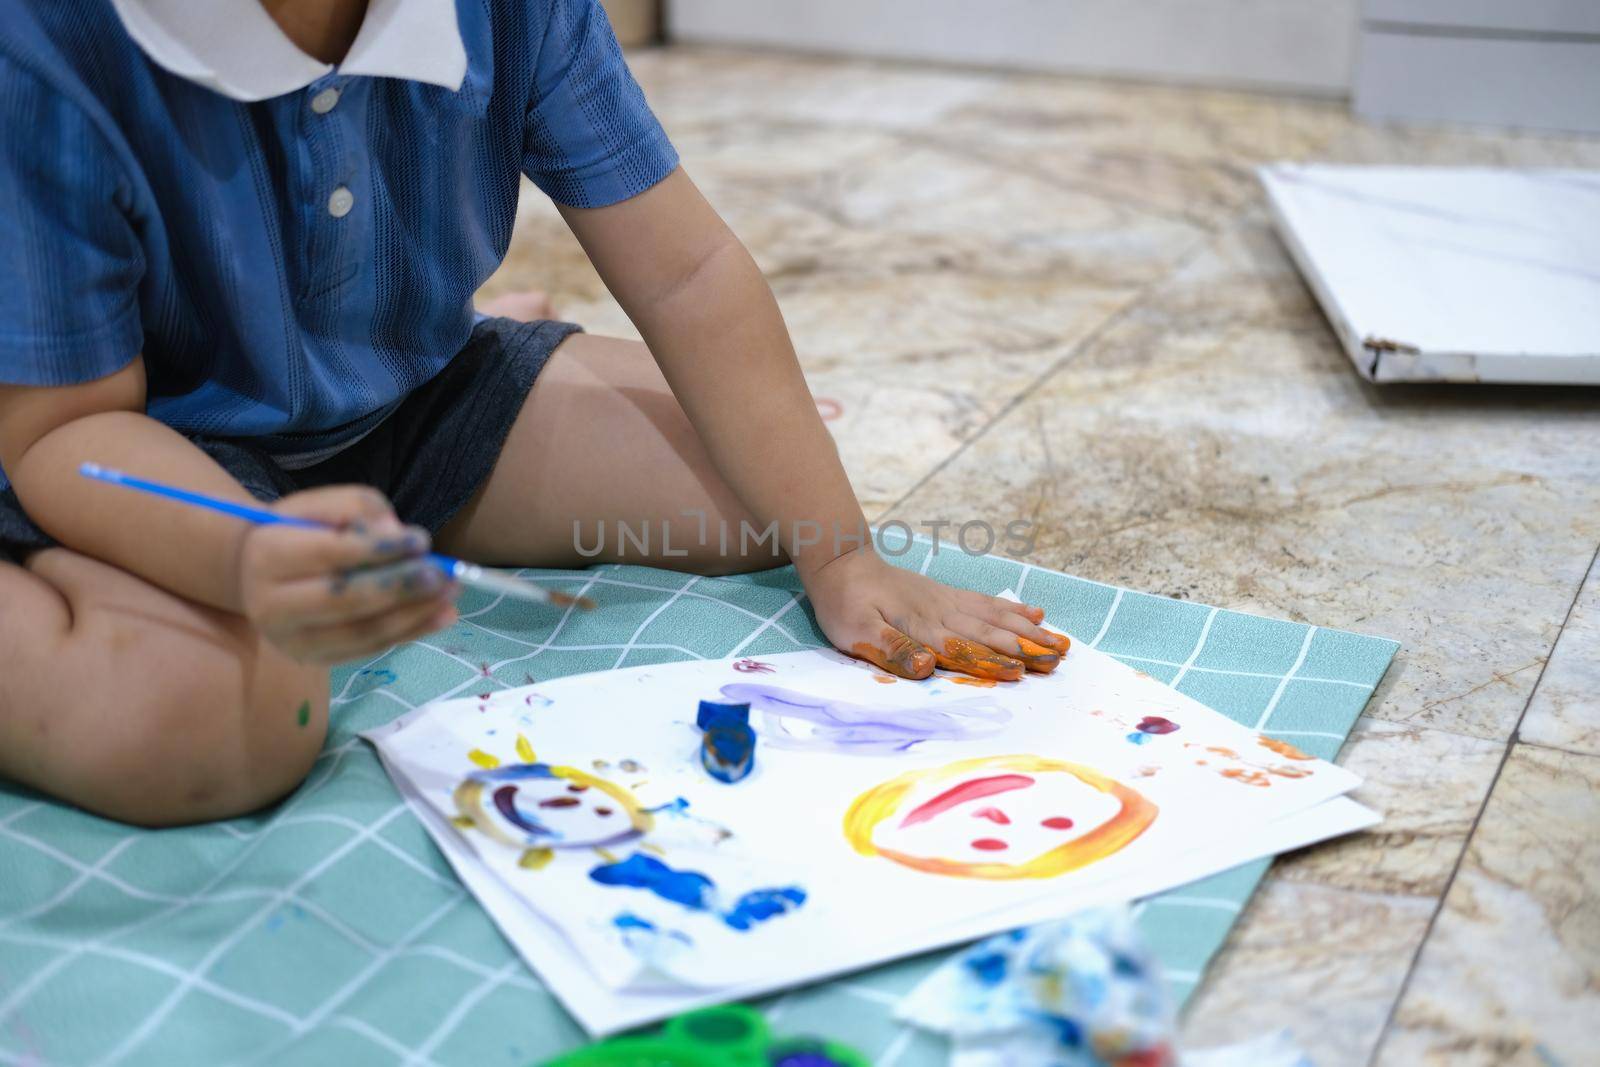 Focus on hands on paper, early childhood learning by using paints and brushes to build imagination and enhance skills on the board. by Manastrong